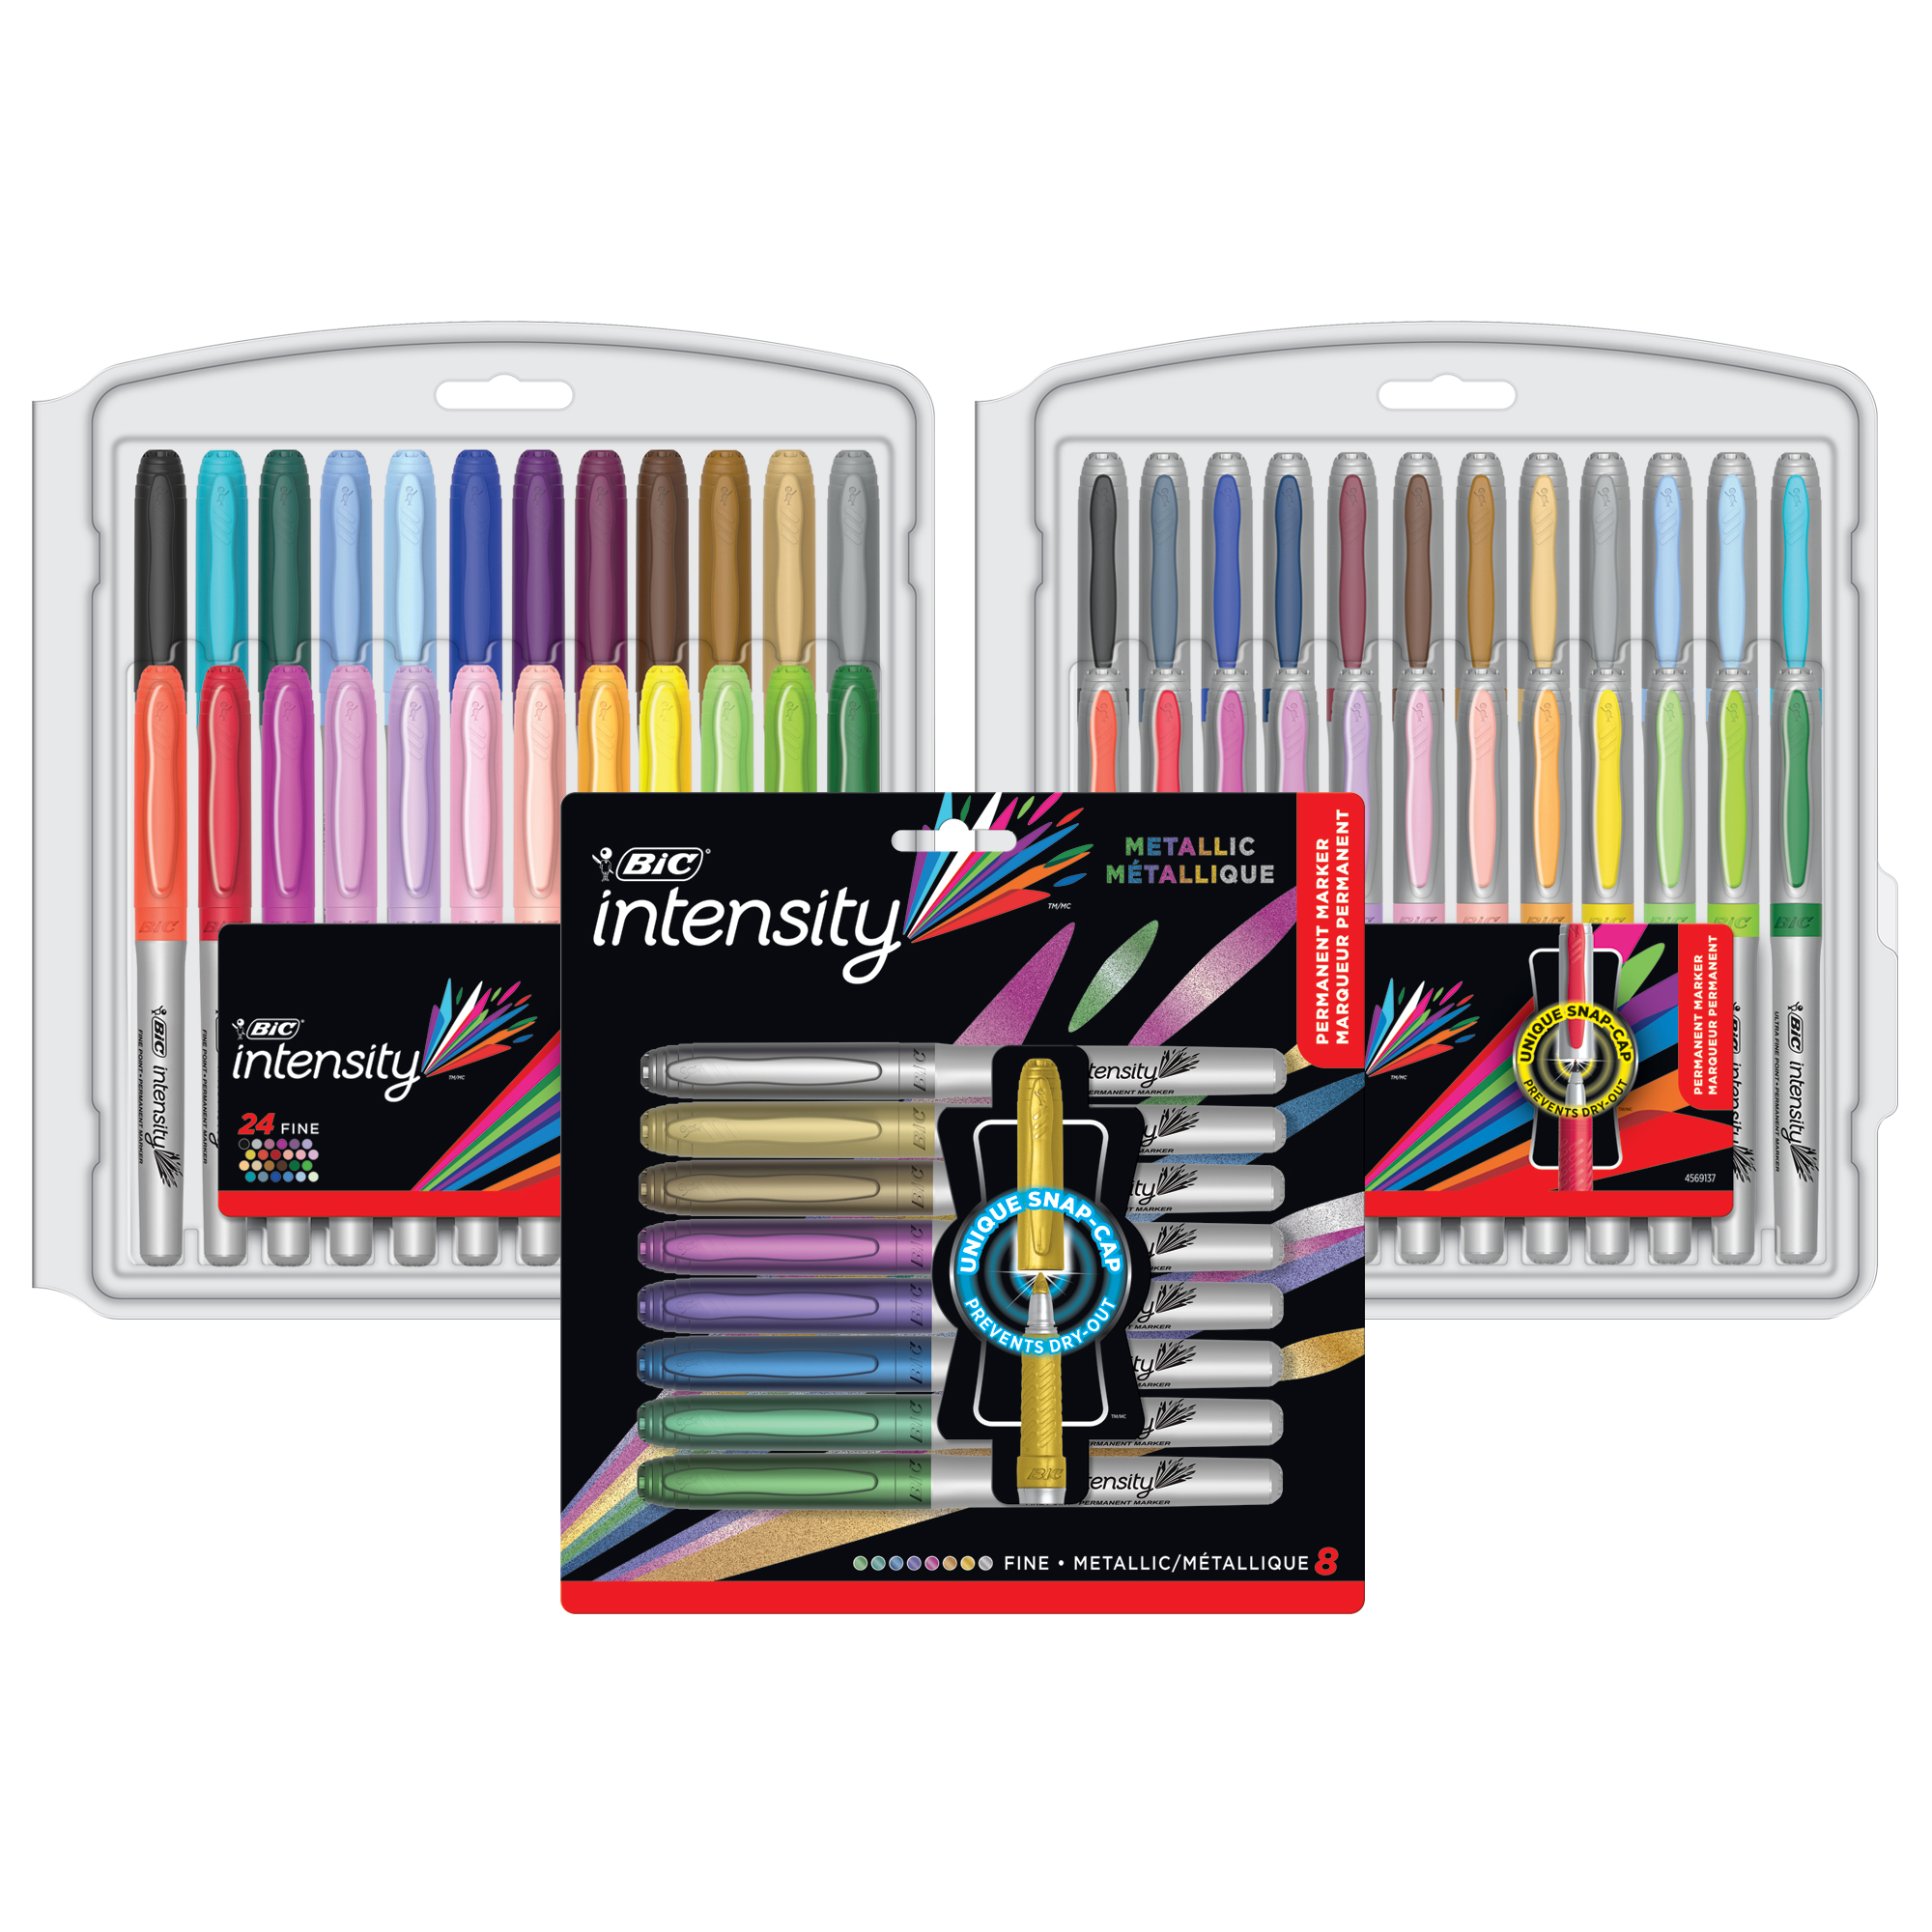 BIC Intensity Permanent Marker Bundle, Assorted Tips and Colors, 56-Count - image 1 of 12